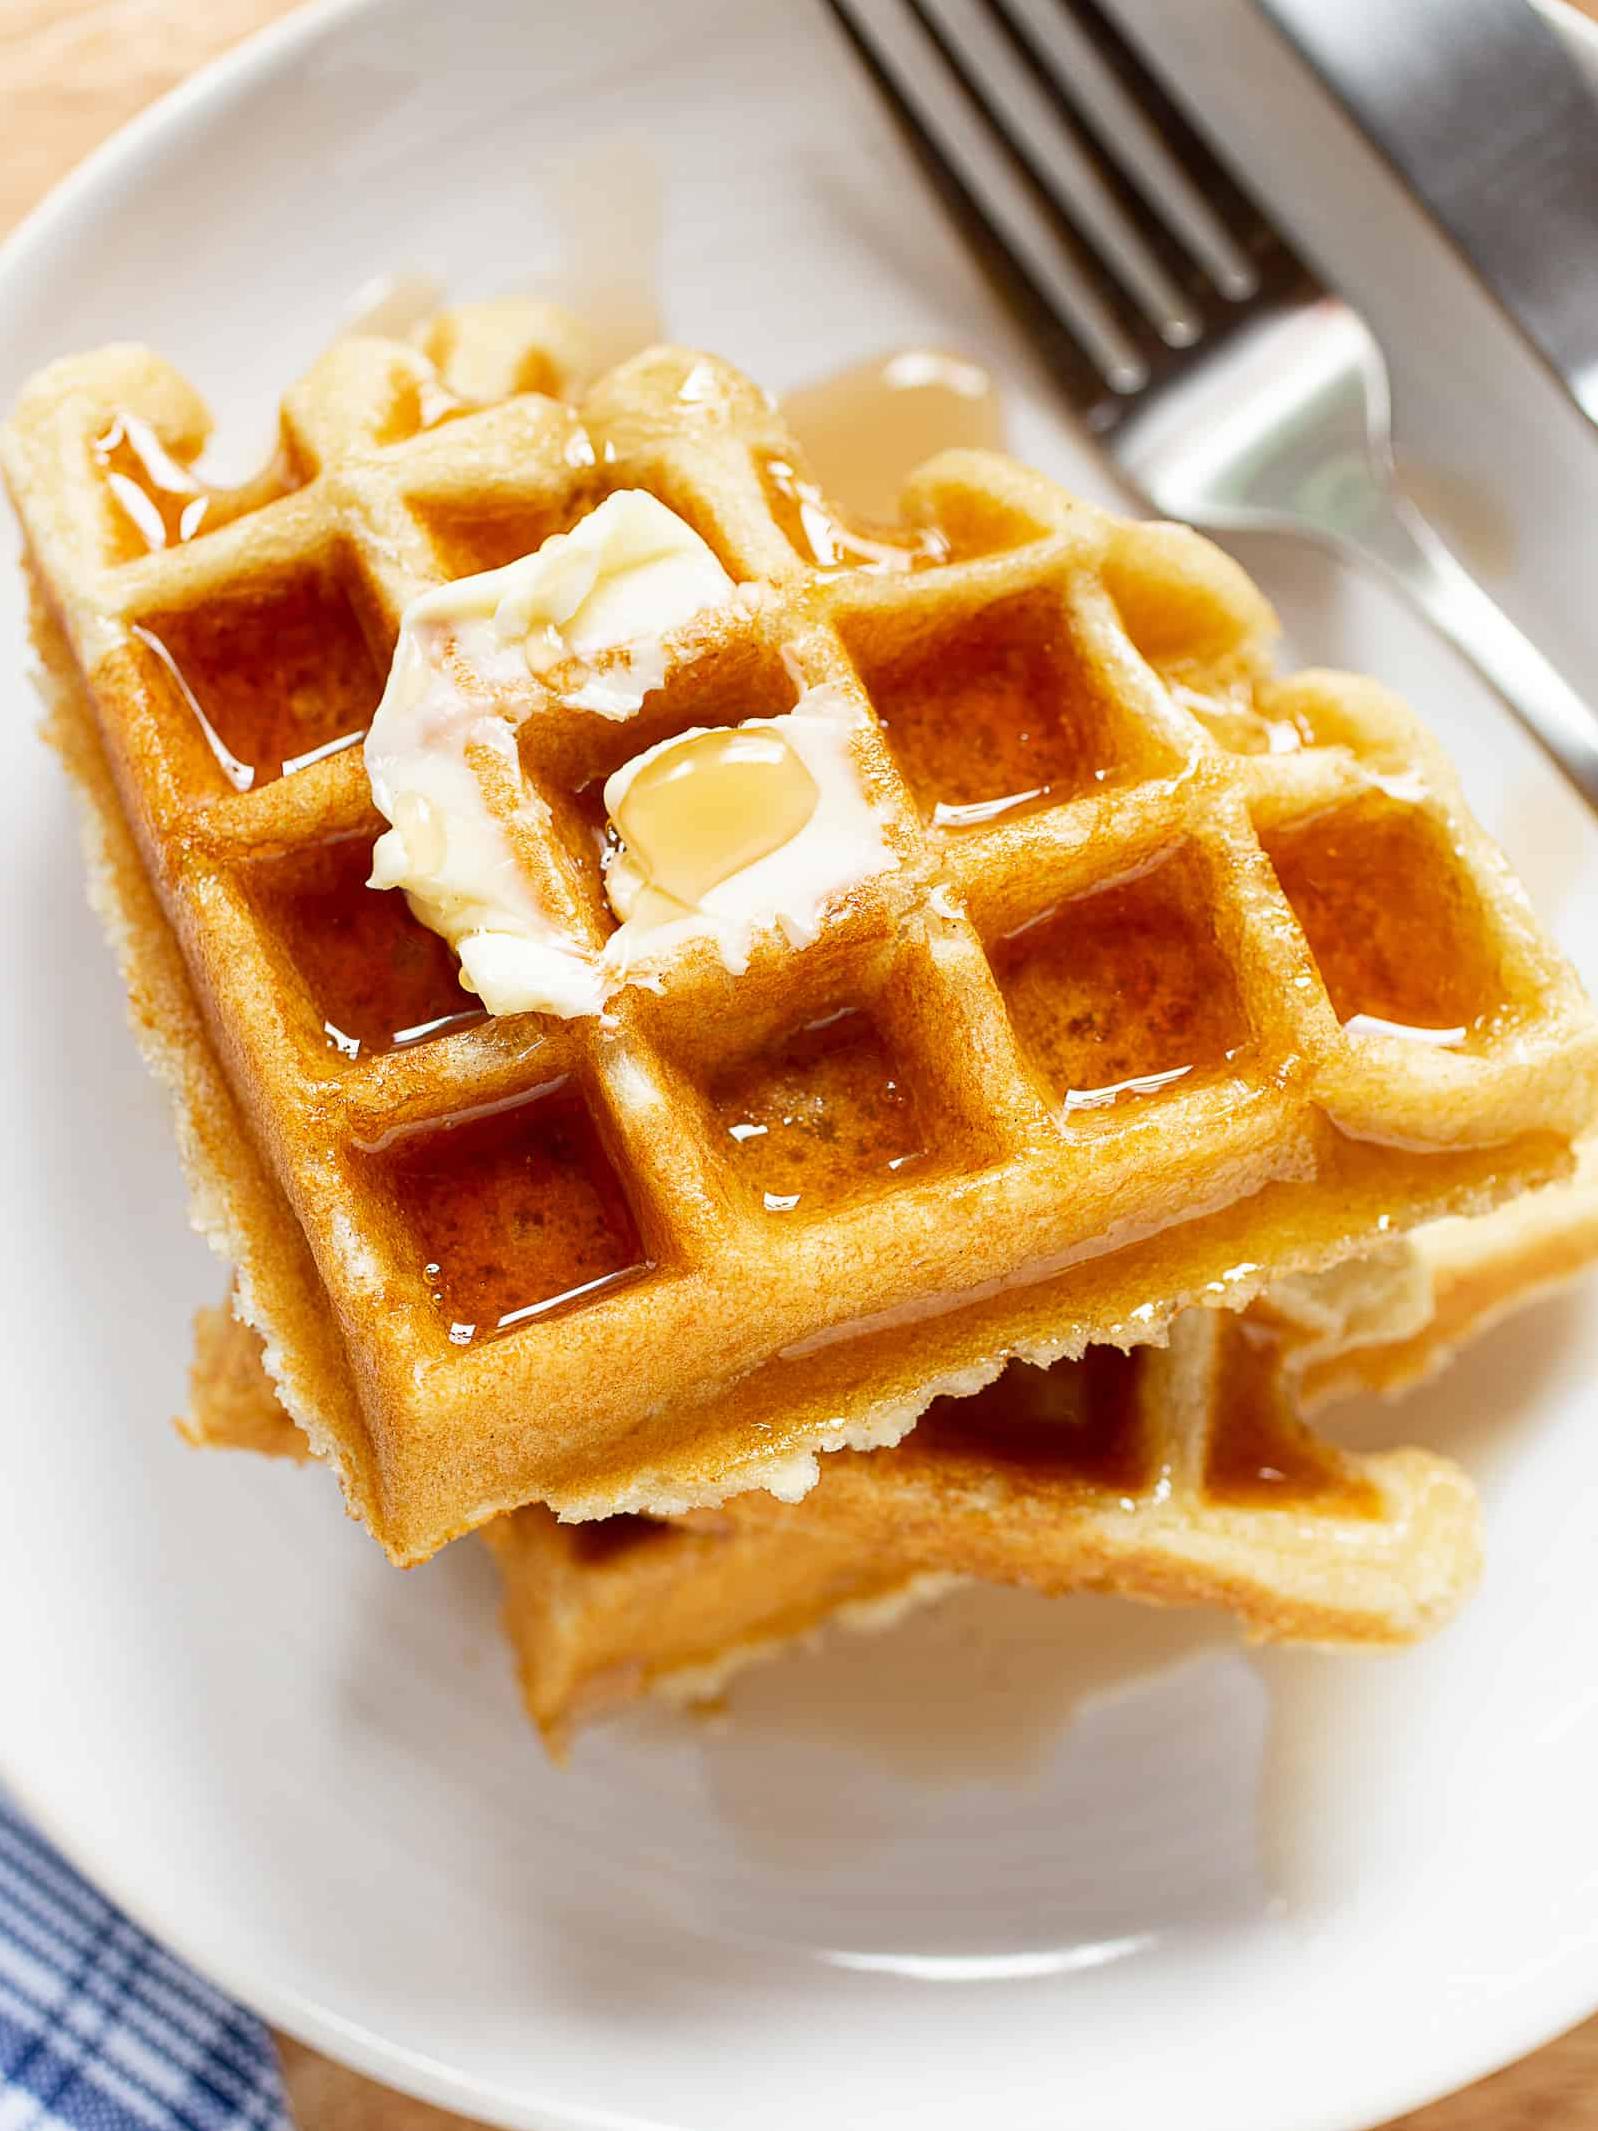  Wrapping up Monday morning with these delicious homemade waffles.